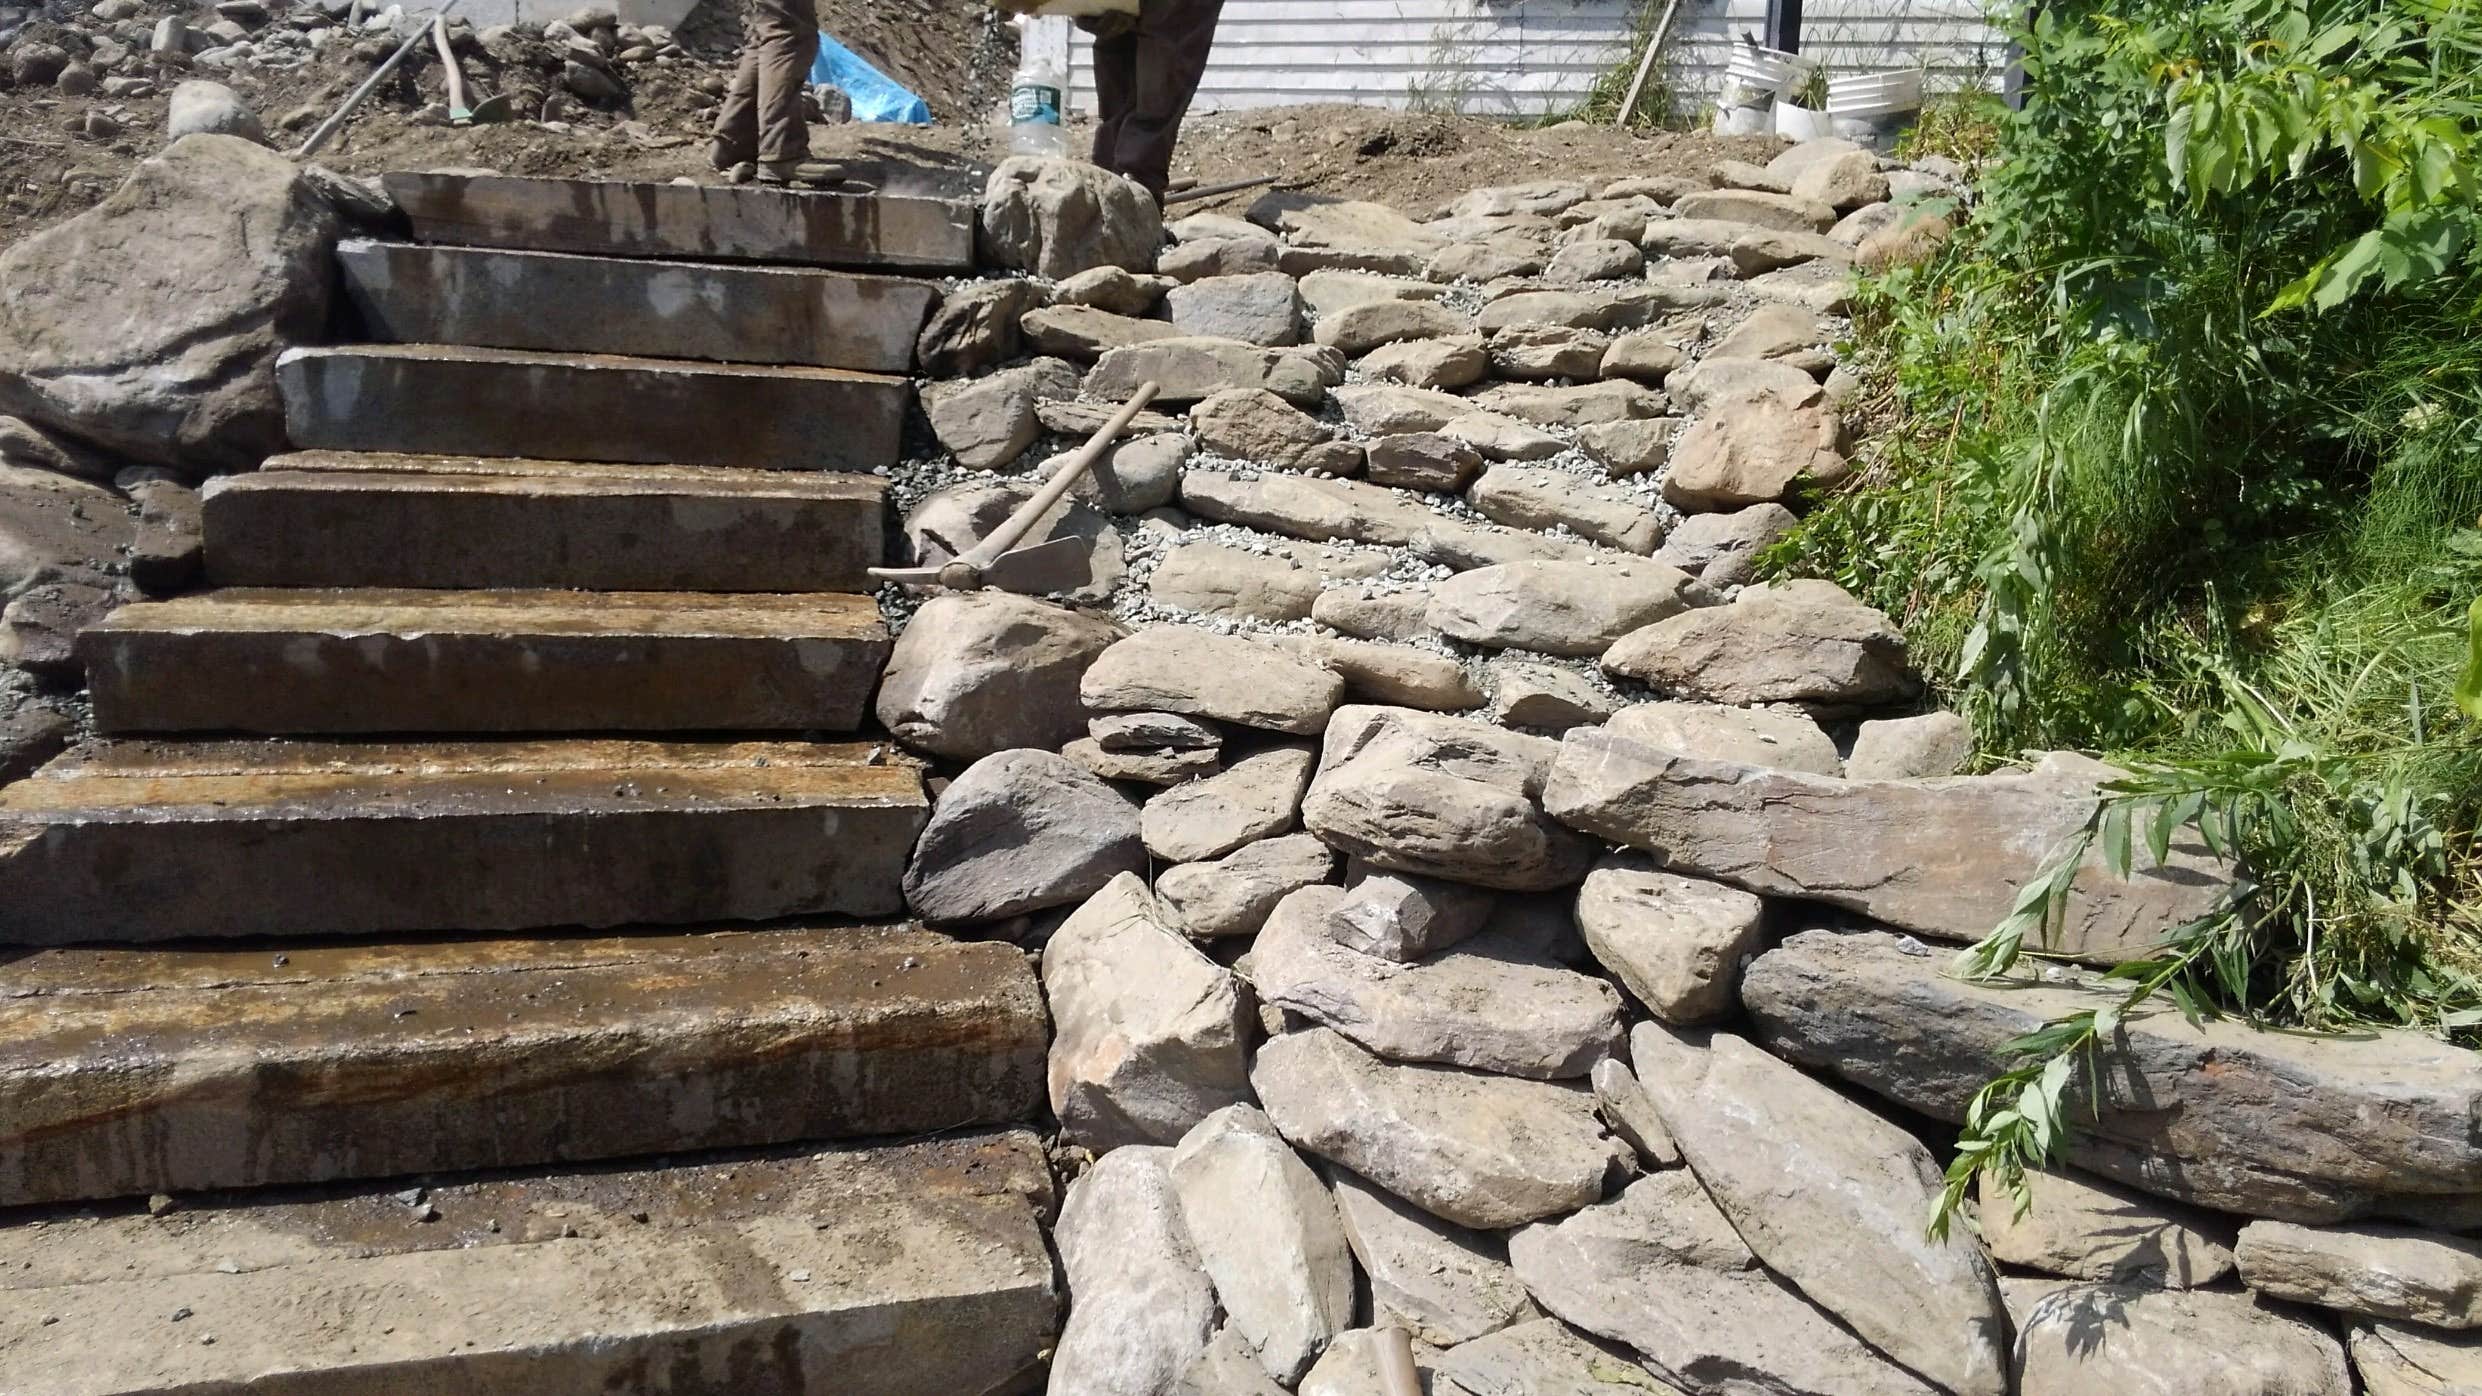 New granite stairs leading down to the river at the Beecher Falls Access area